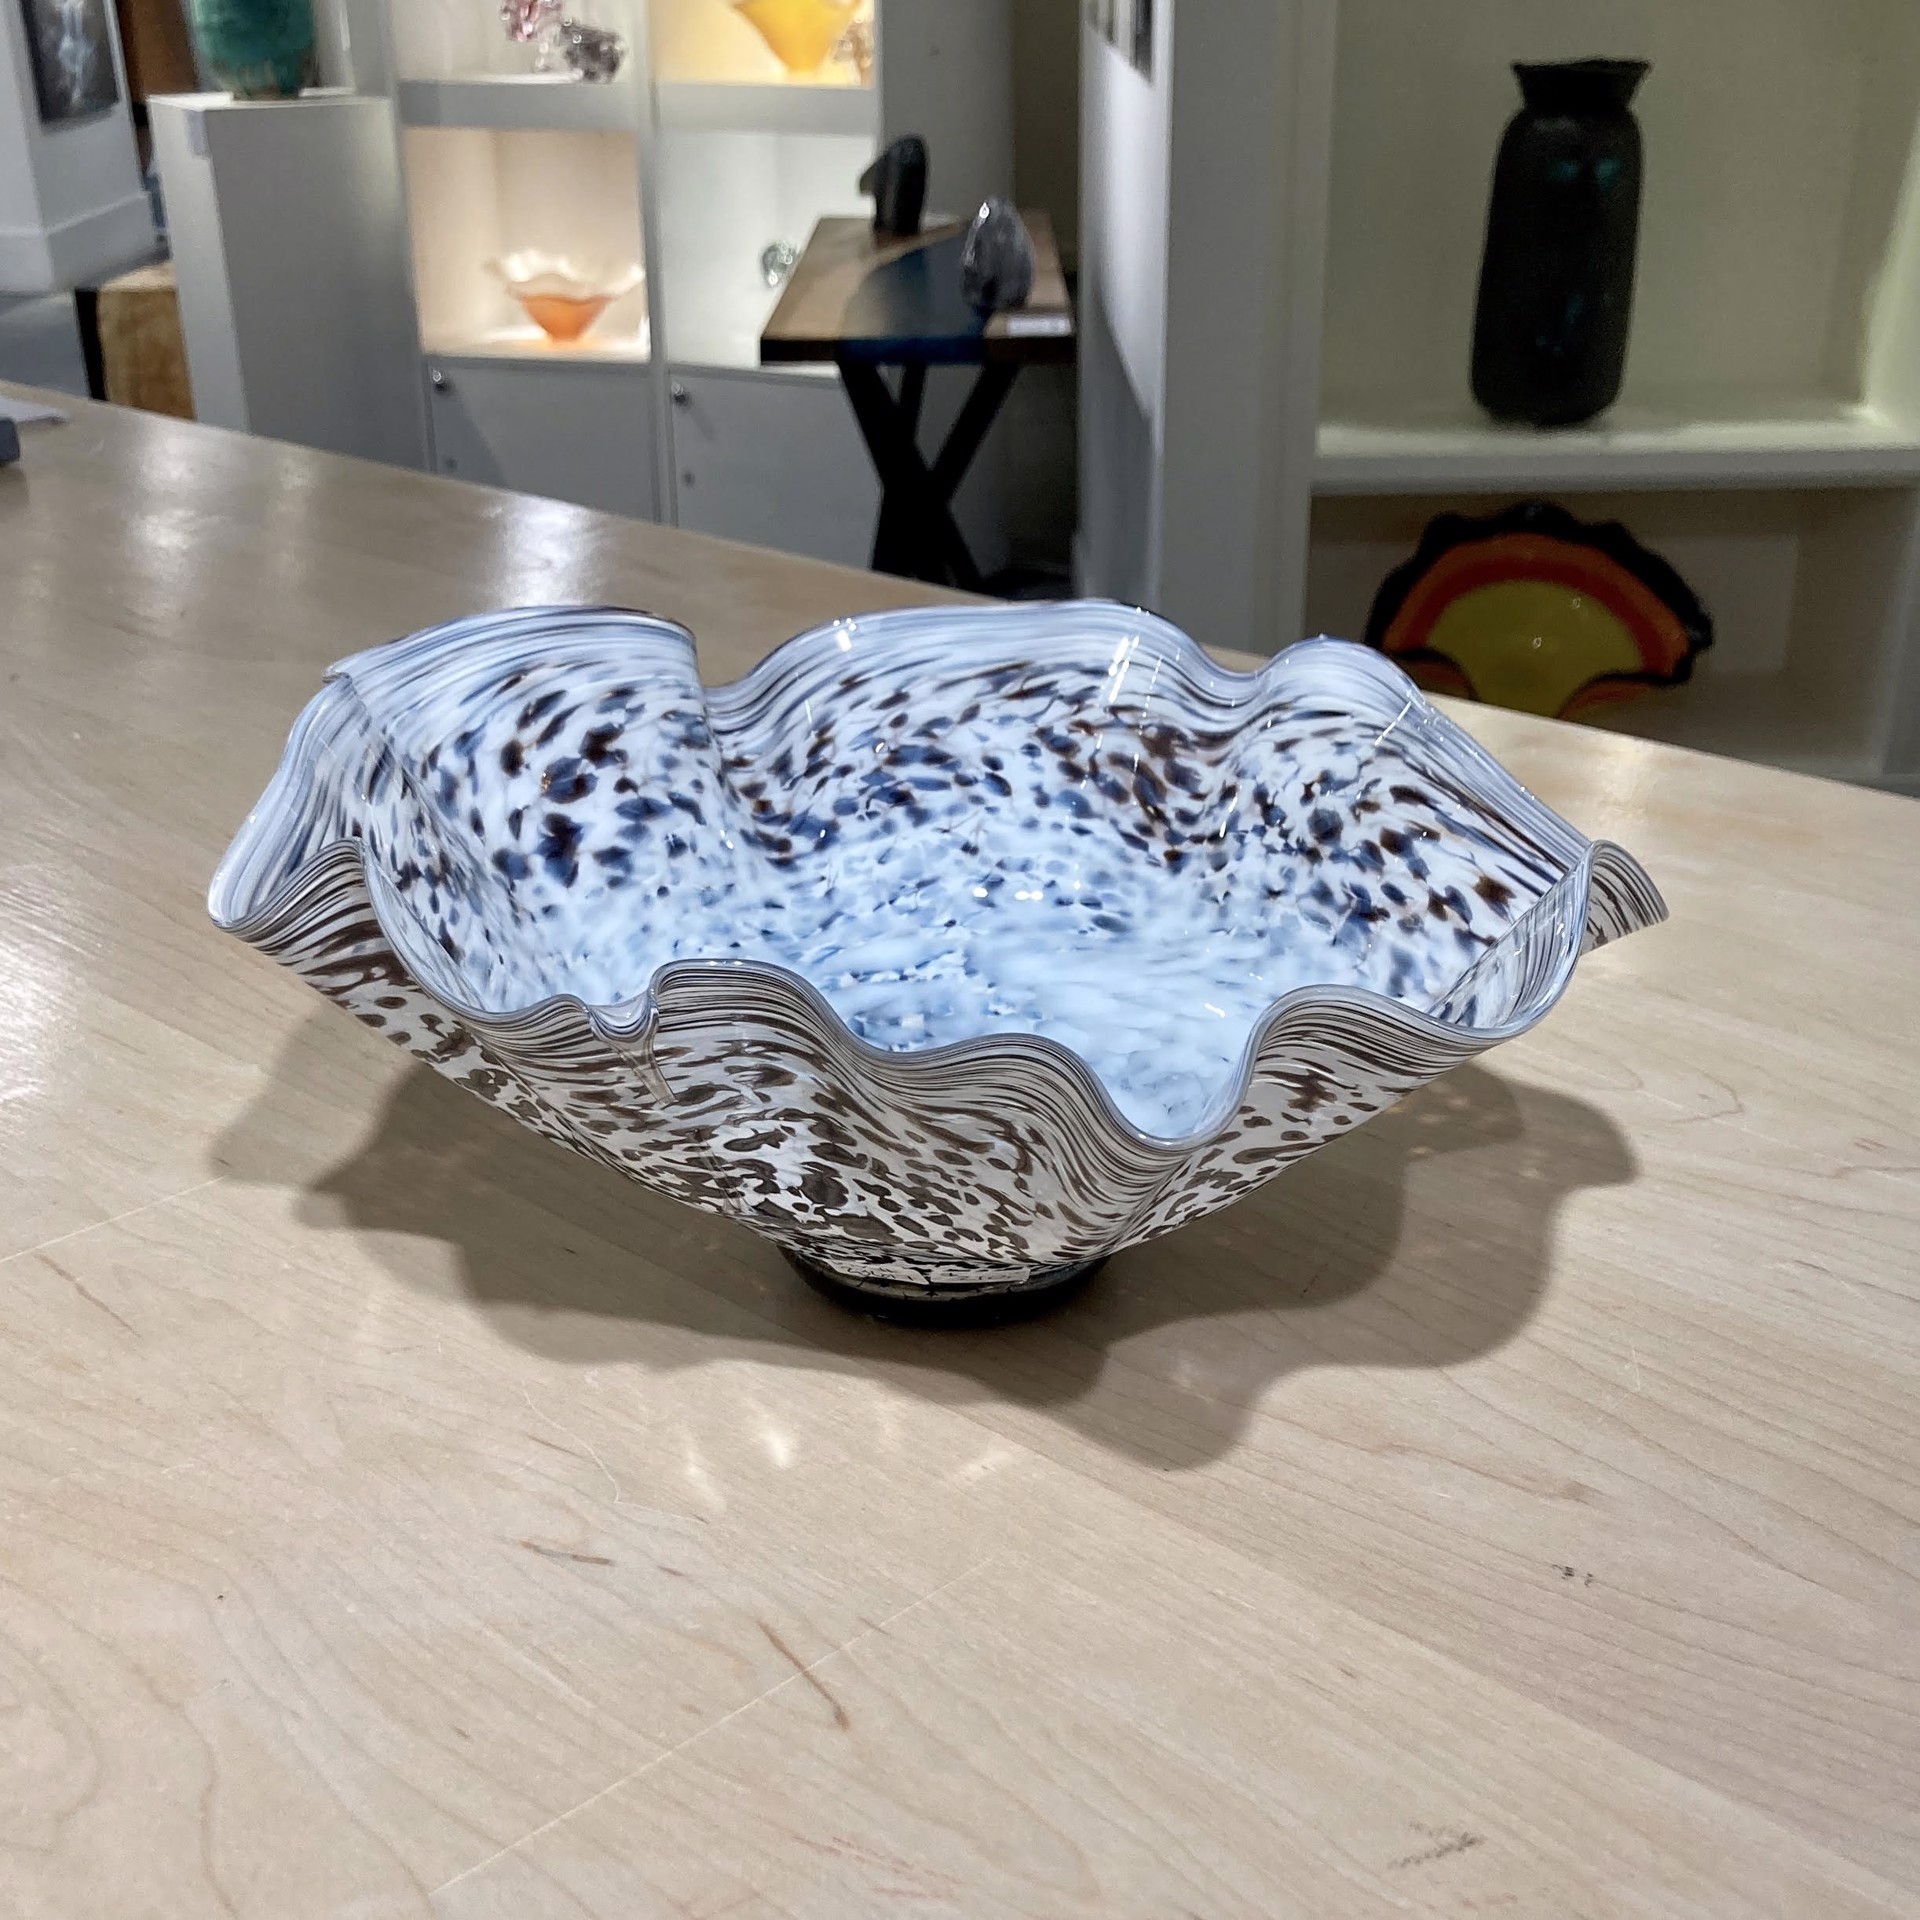 Speckled Egg Wavy Footed Bowl by Hayden MacRae